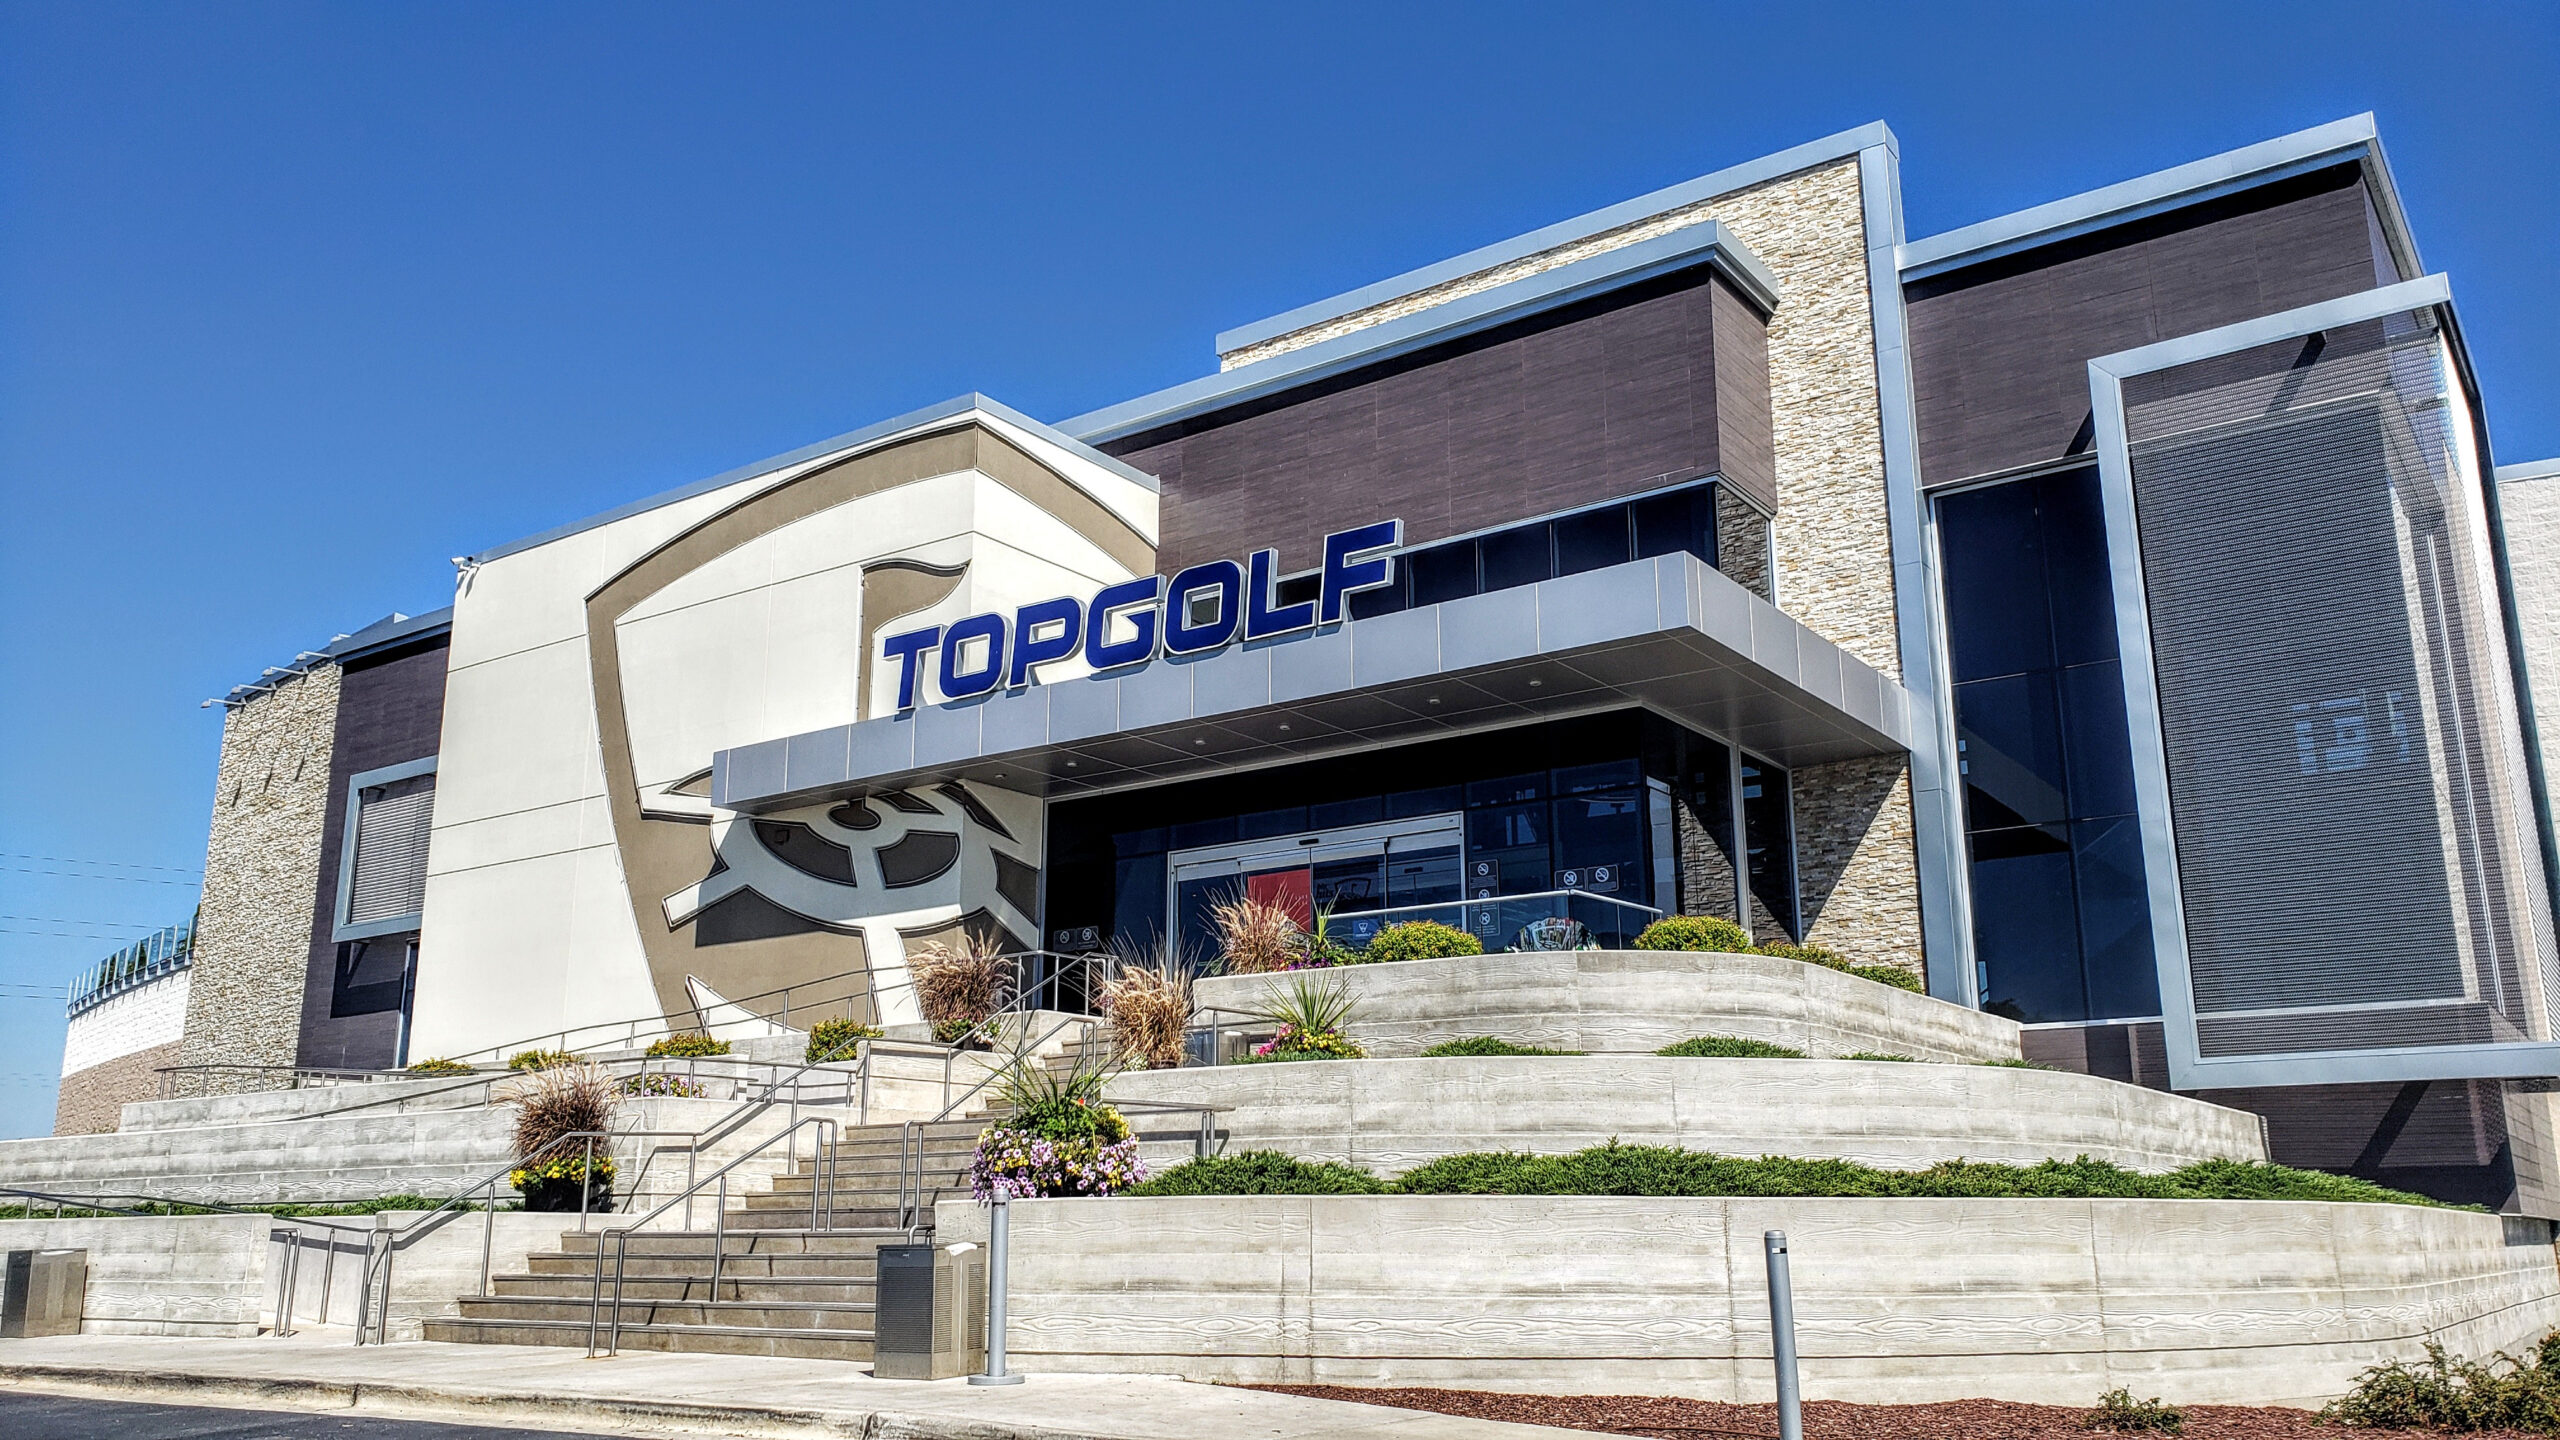 How Much Is Top Golf? -